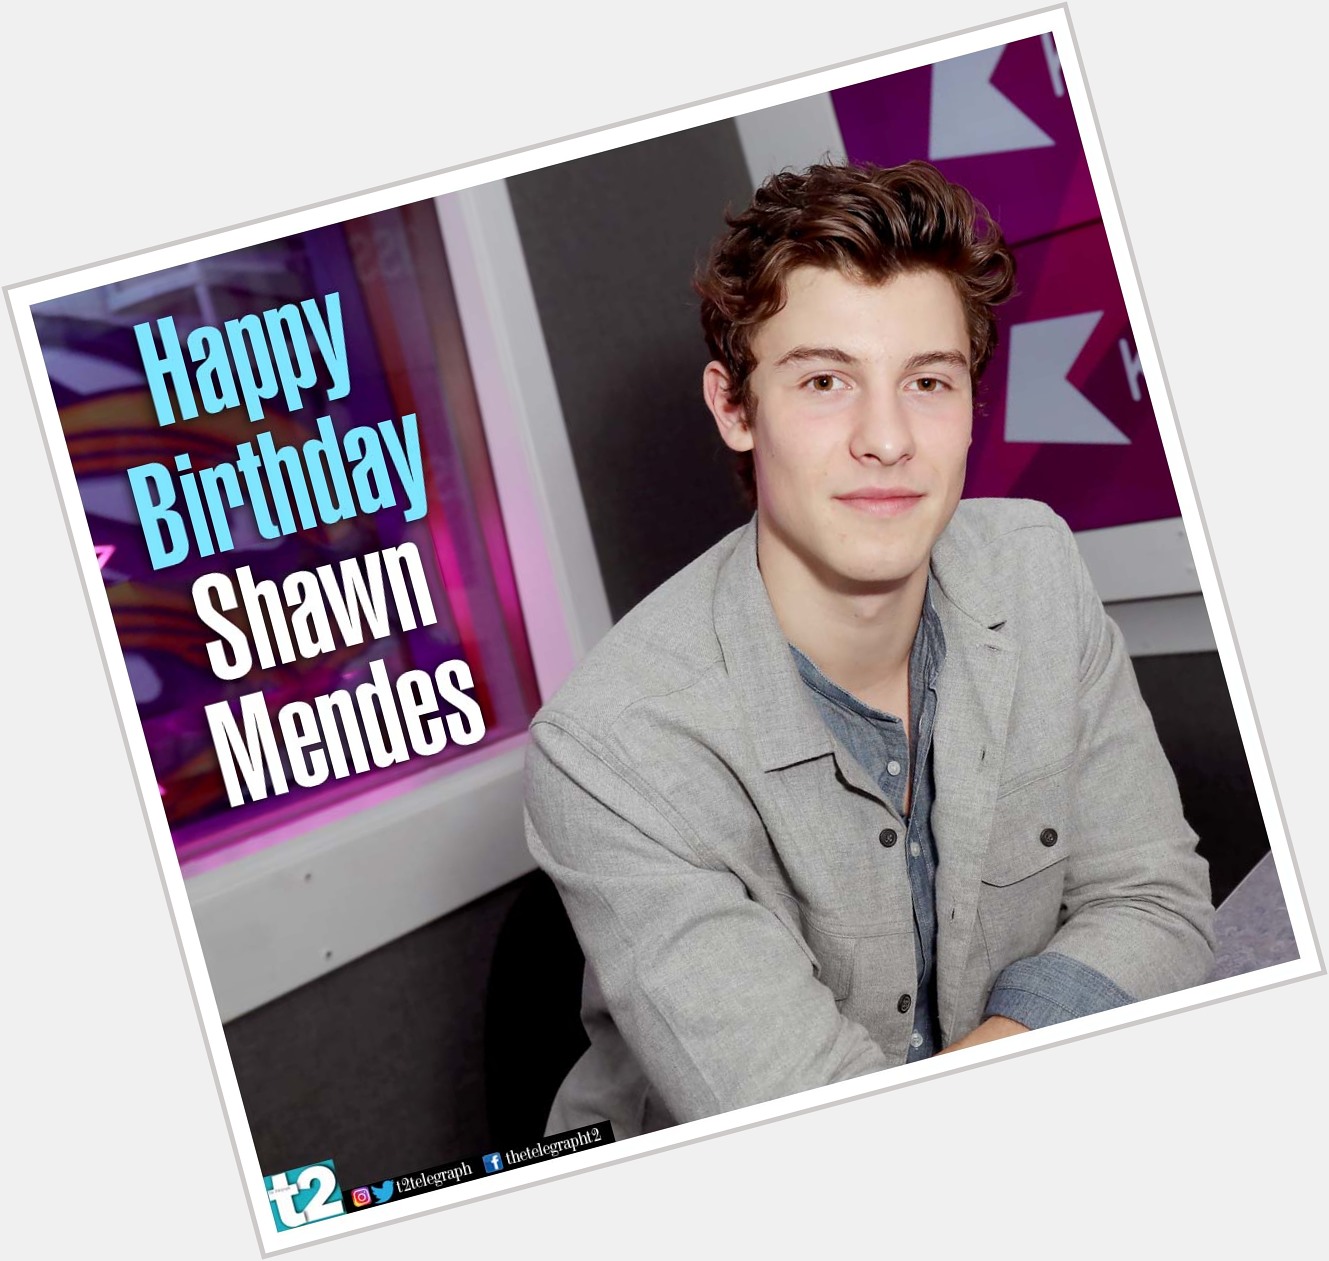 Happy birthday to the life of the party, Shawn Mendes. 